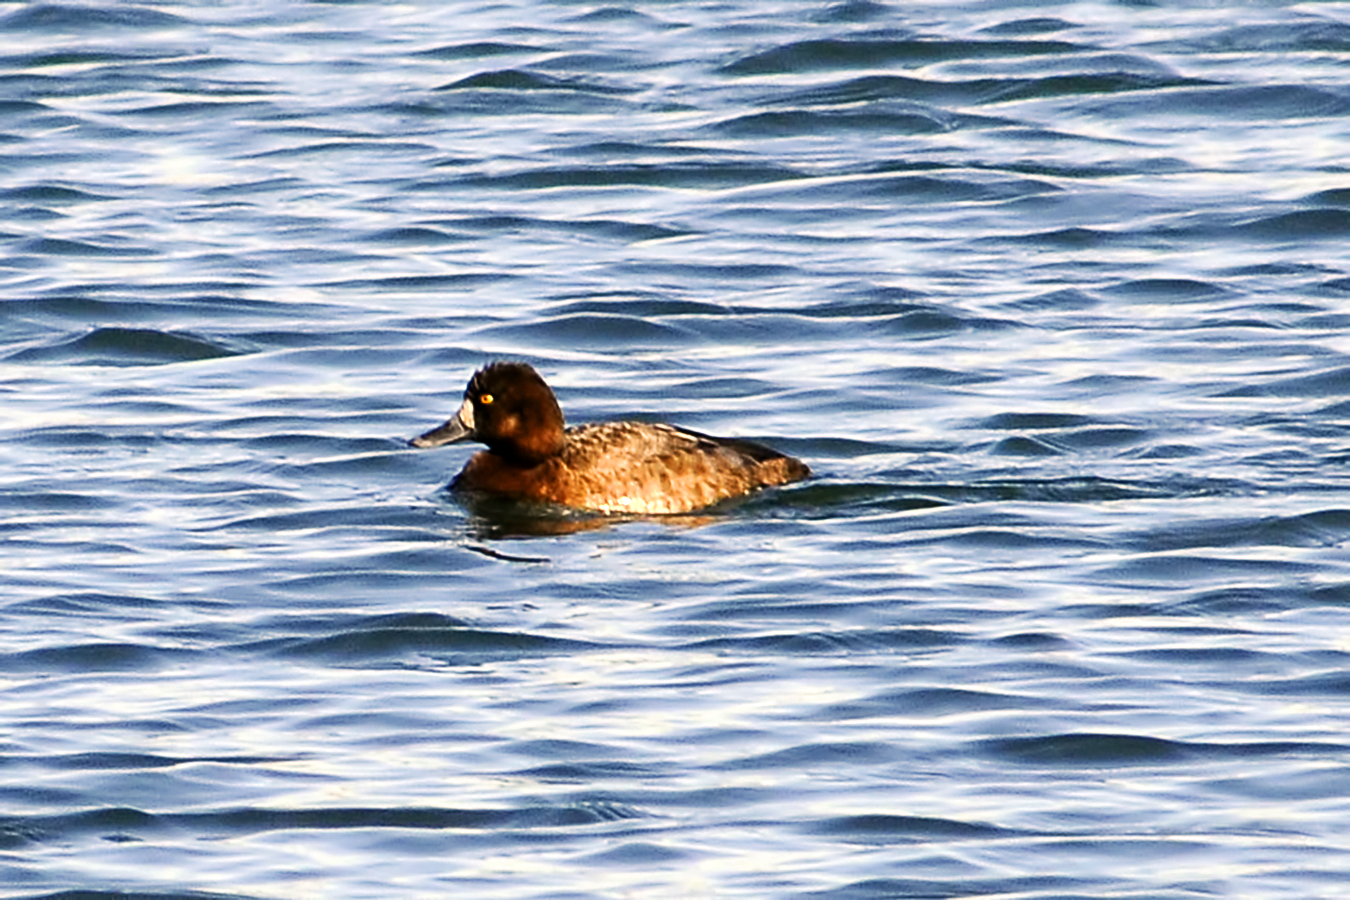 a duck swimming in water near the shore